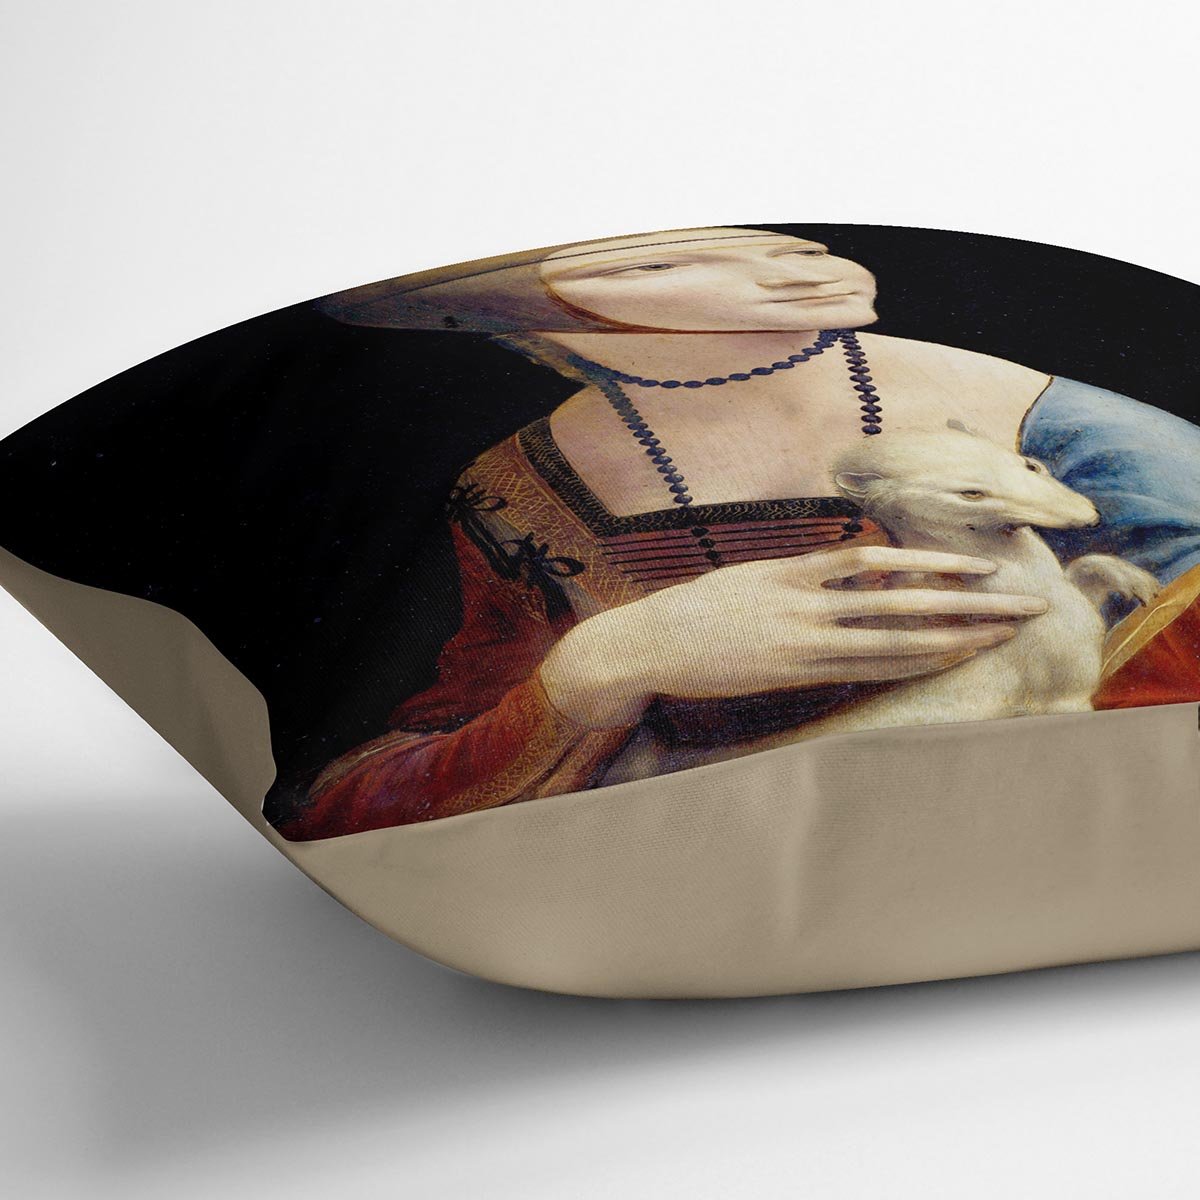 Lady with an Ermine by Da Vinci Throw Pillow